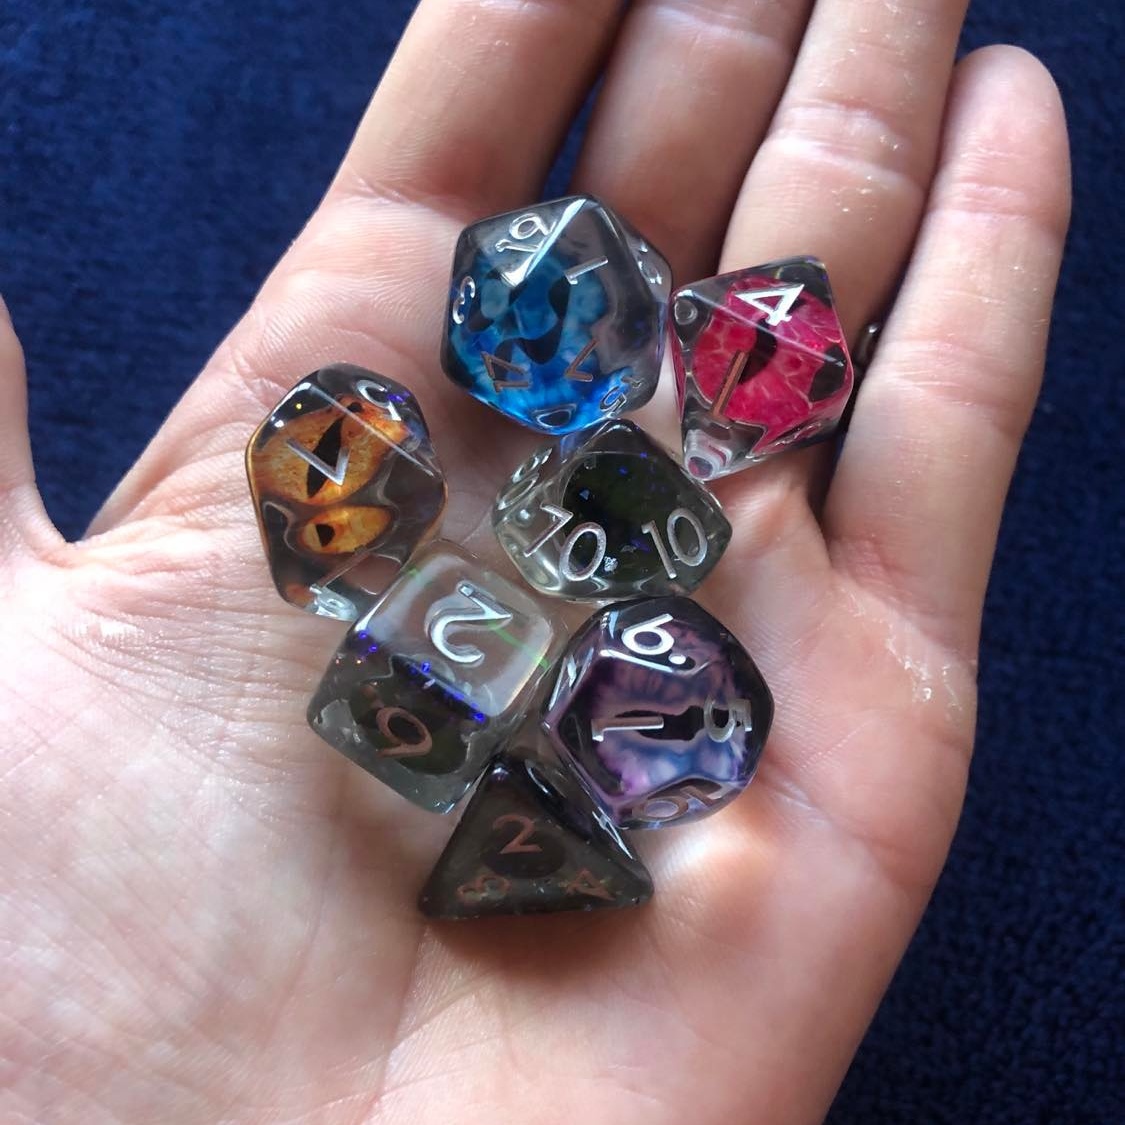 The Critical Kit dragon eye dice, resting in the palm, with several of the eyes visible through the clear dice.